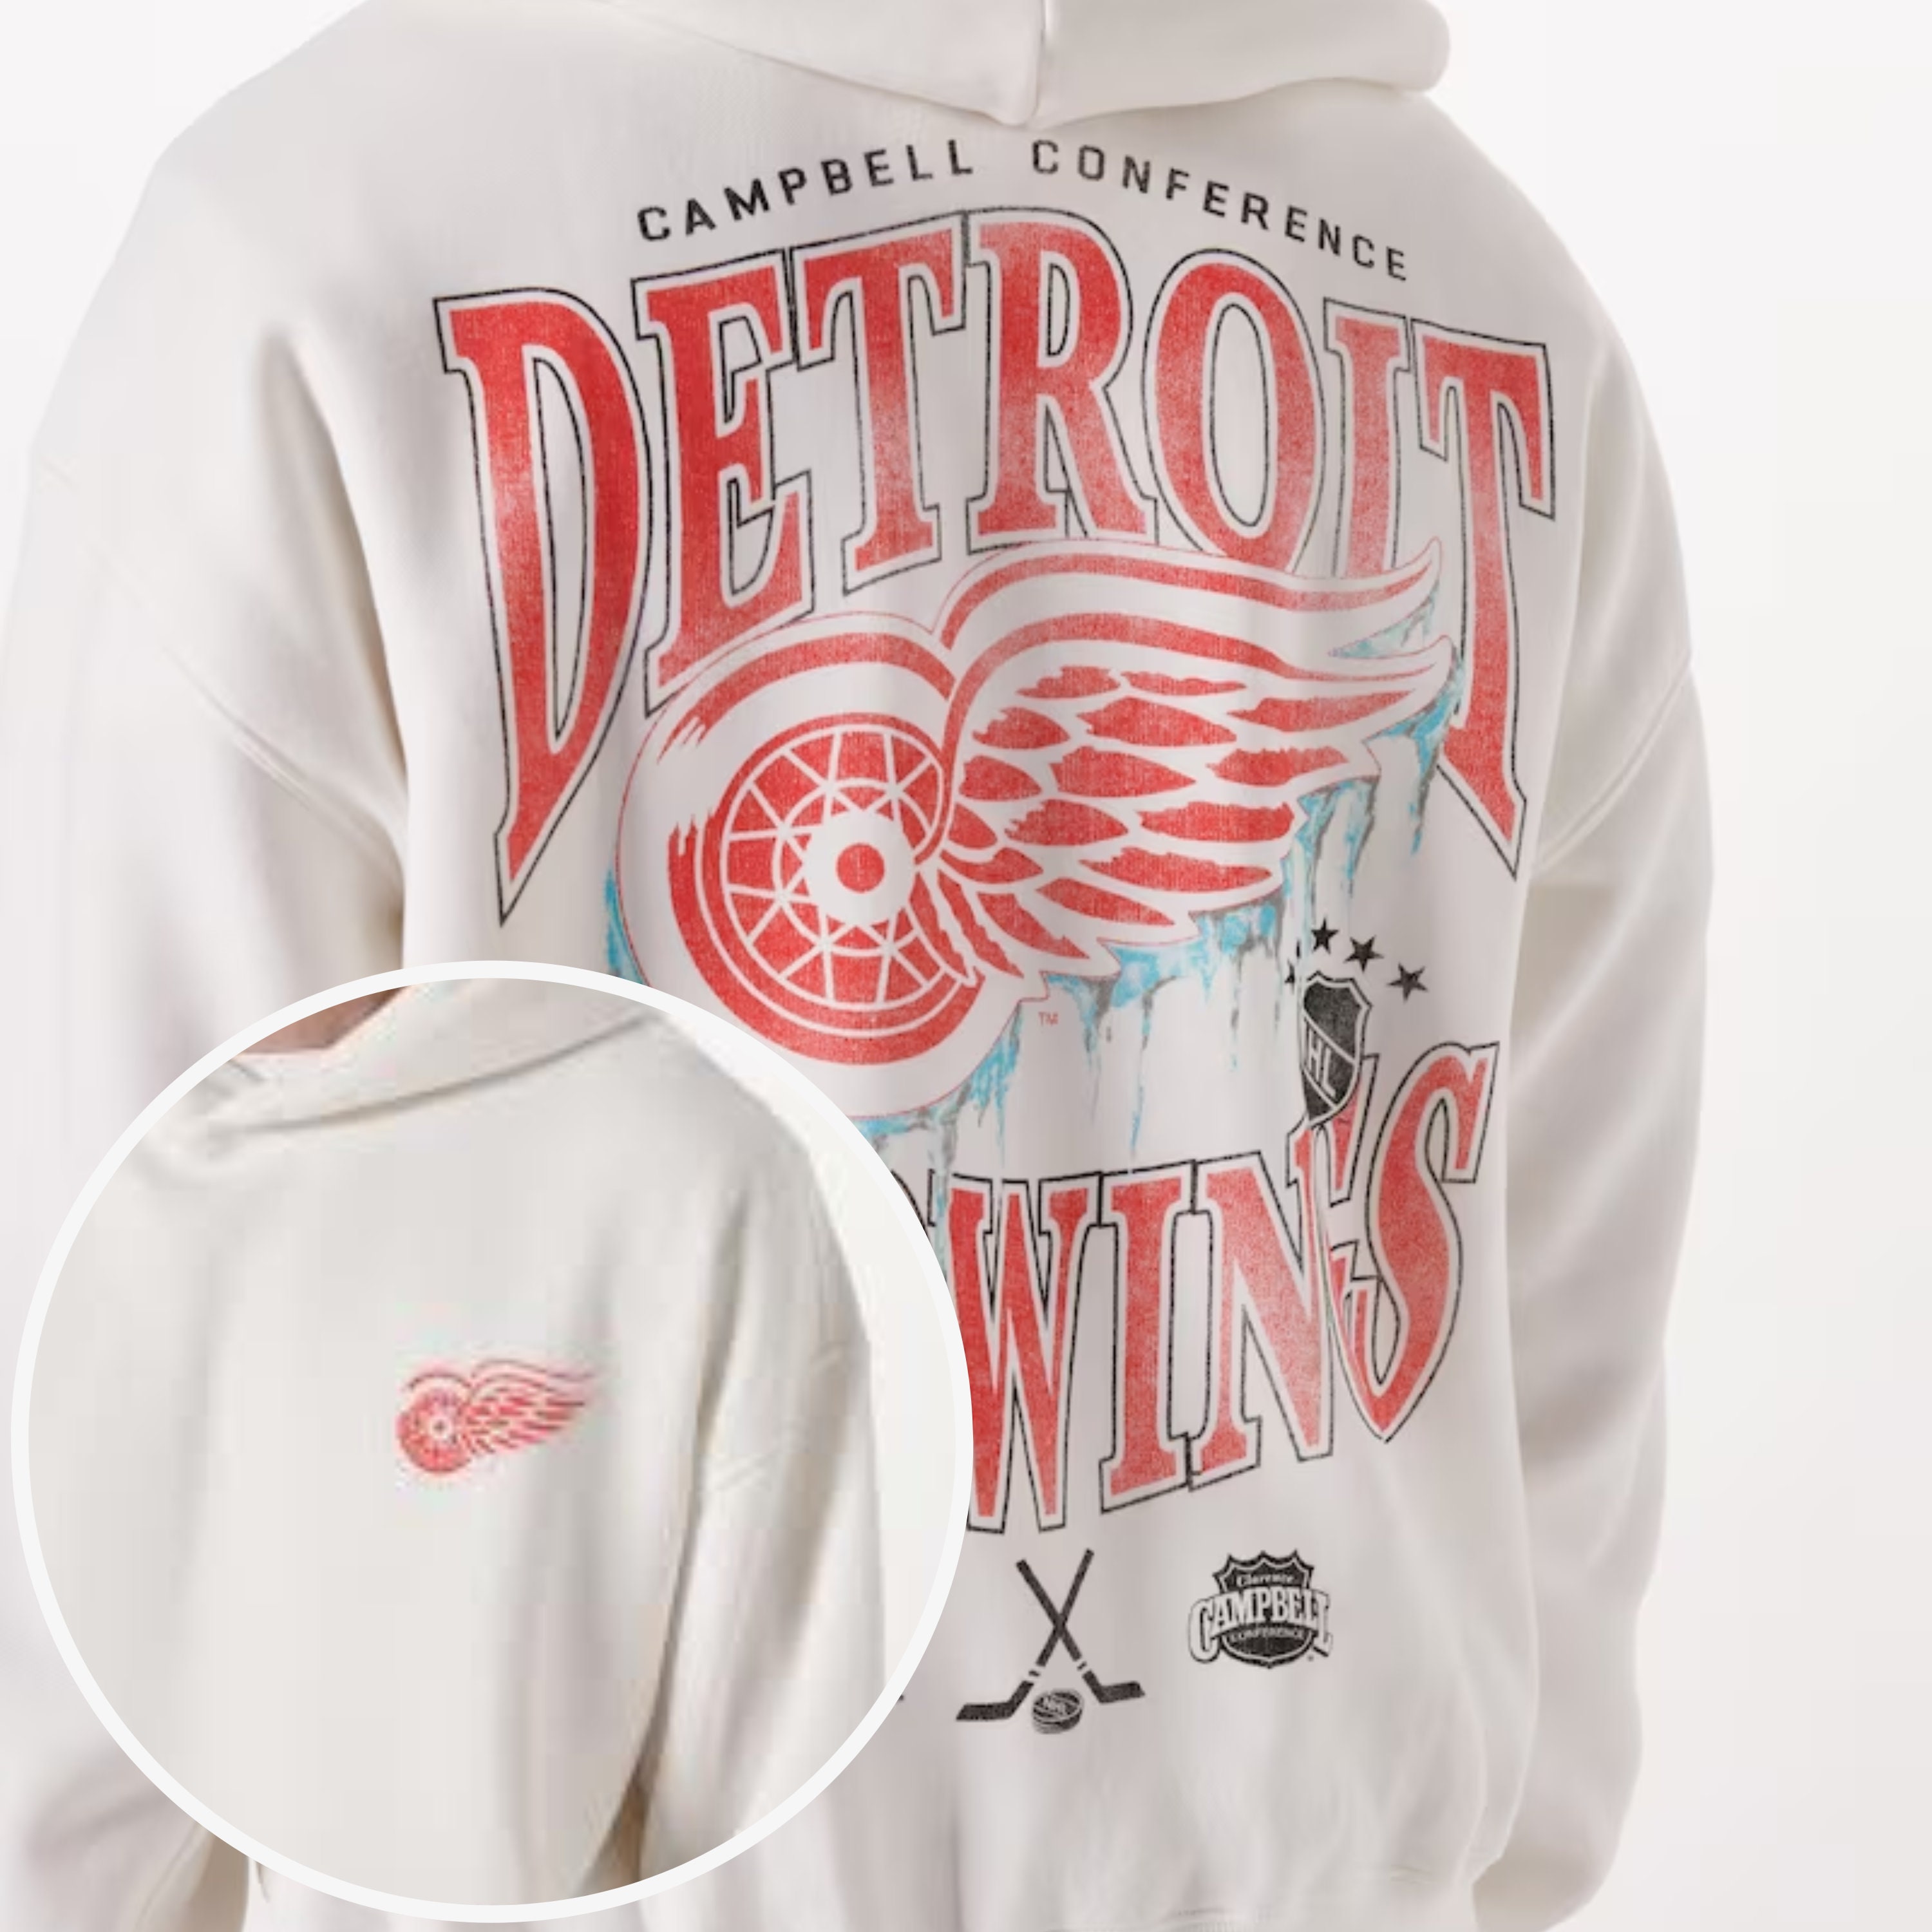 Designer creates octopus-inspired Red Wings heritage jersey